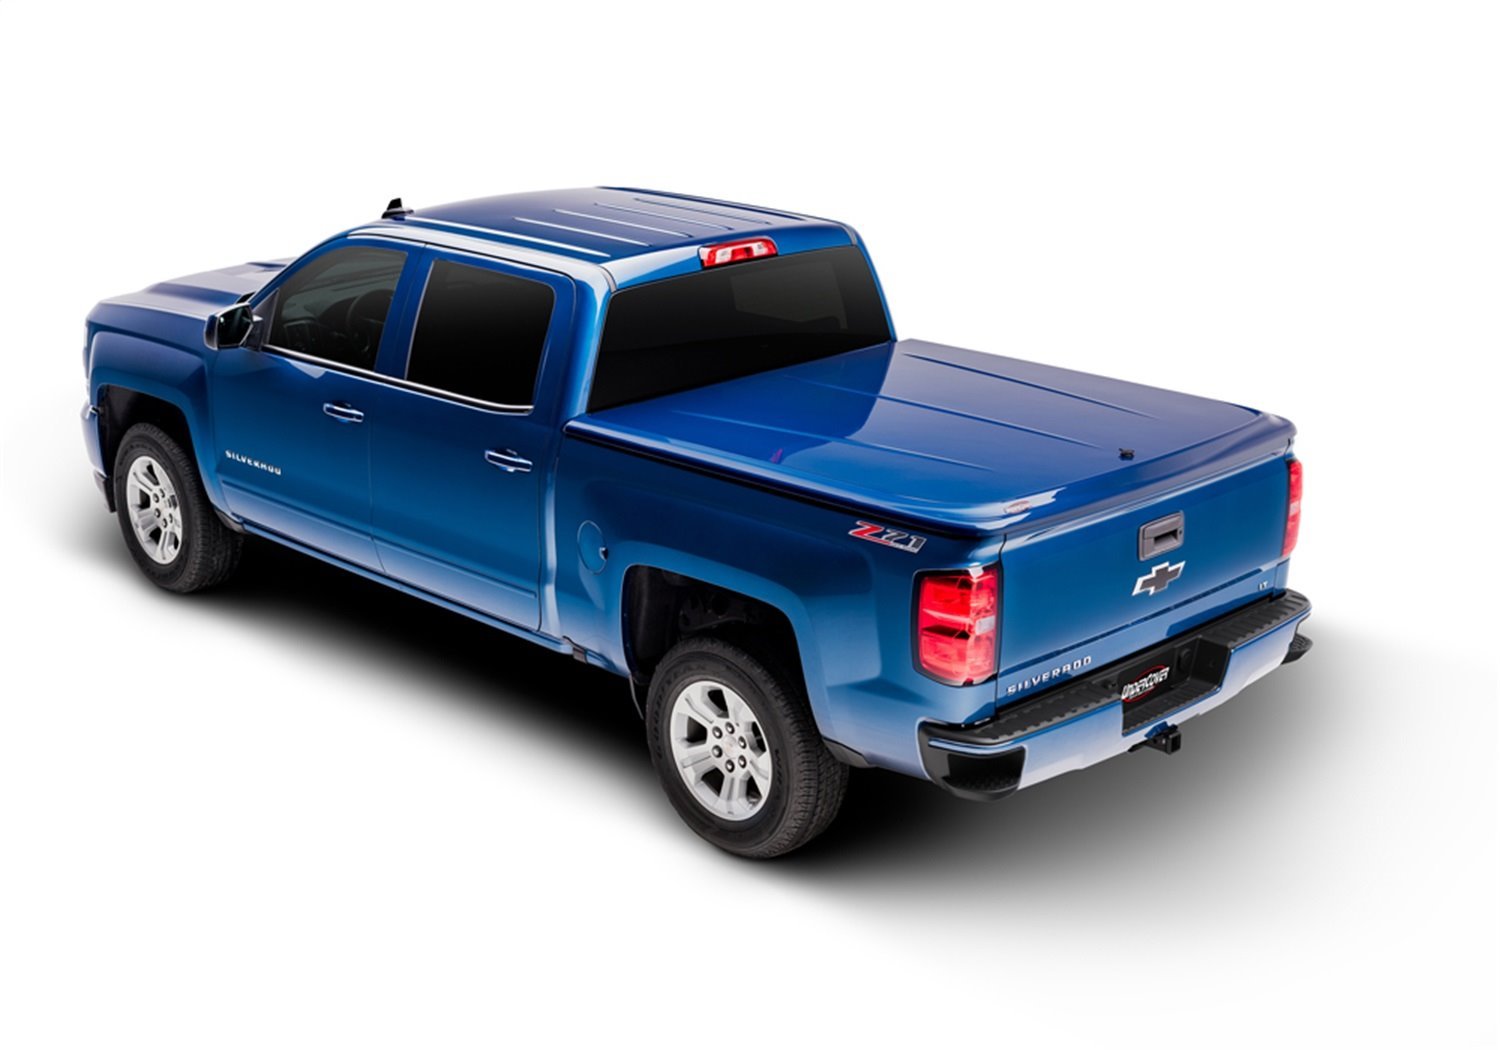 UC2206L-JS LUX Hard Non-Folding Cover, Fits Select Ford F-150 5'7" Bed Crew (Includes Lightning) JS Iconic Silver Metallic